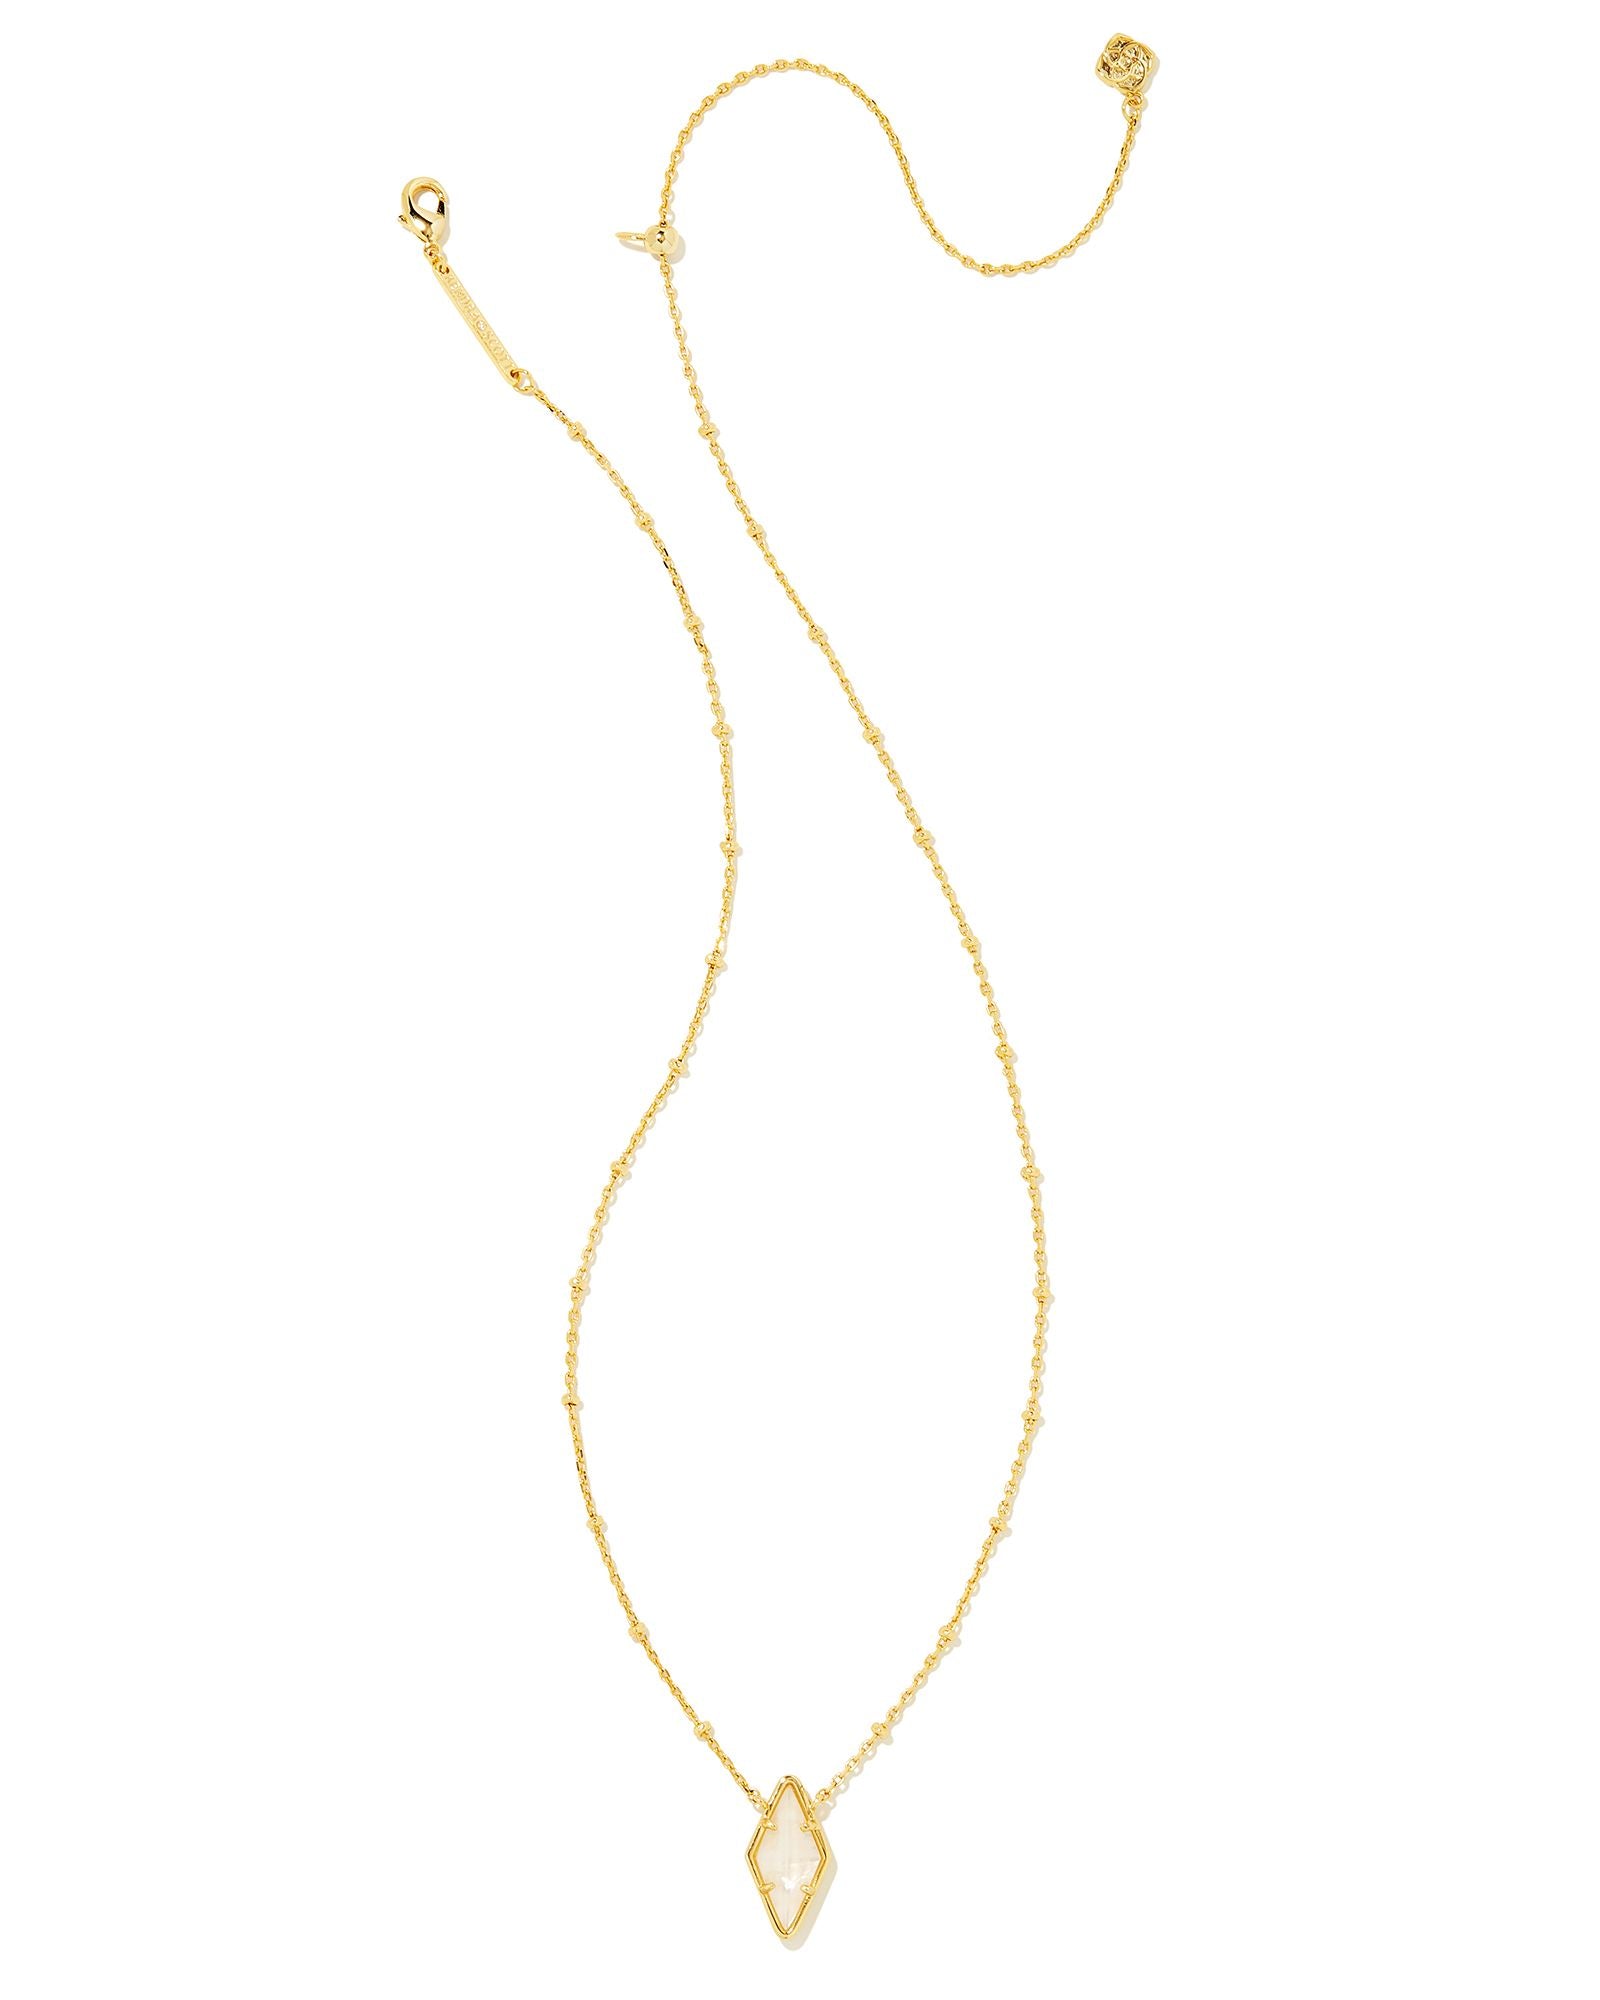 Kendra Scott | Kinsley Gold Short Pendant Necklace in Ivory Mother of Pearl - Giddy Up Glamour Boutique